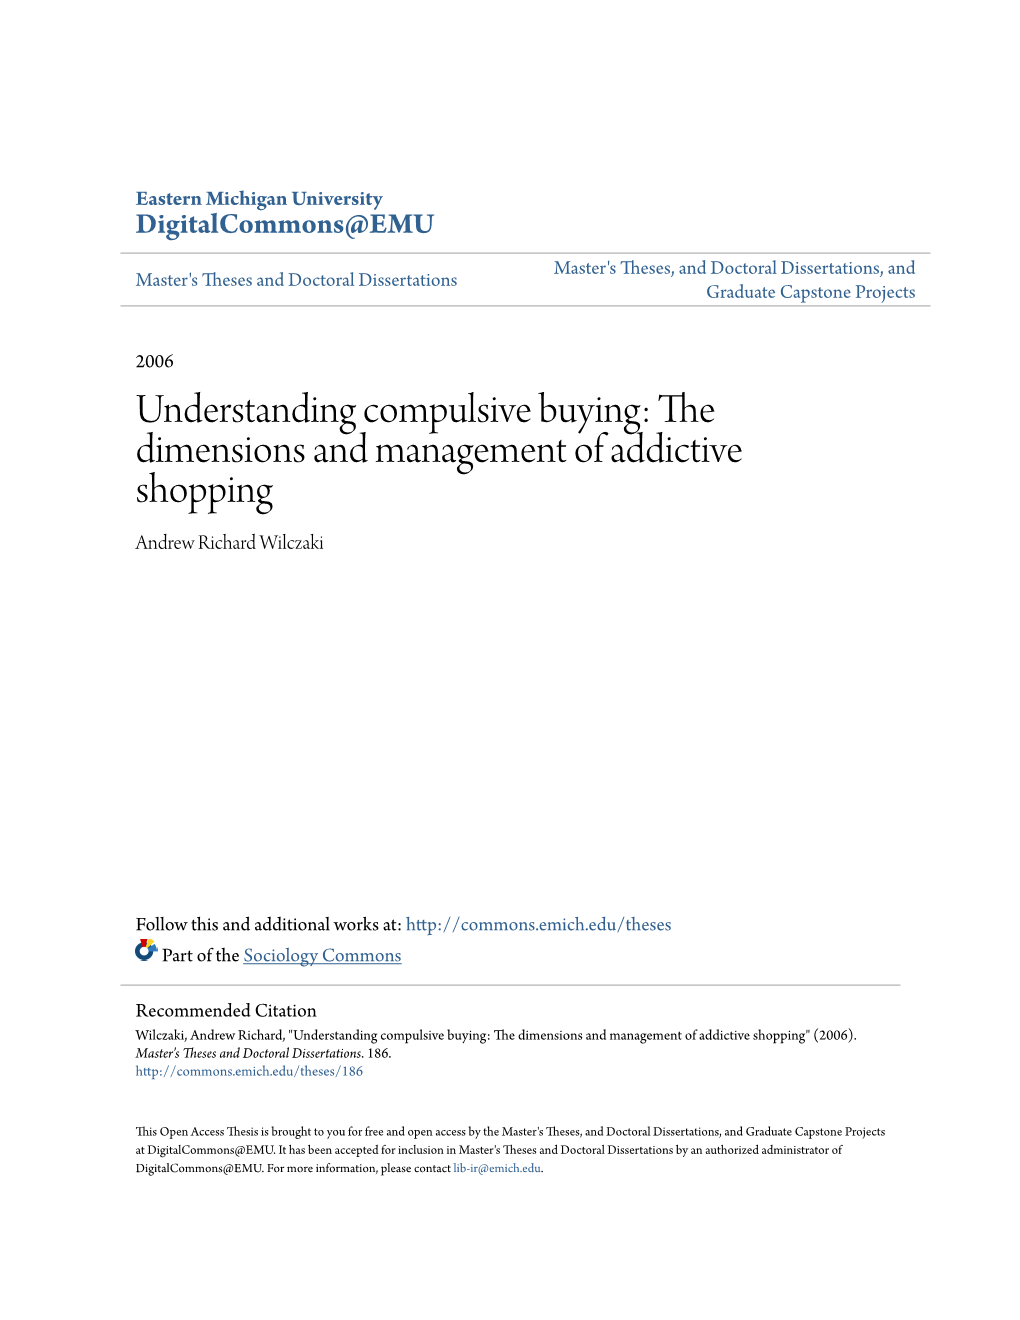 Understanding Compulsive Buying: the Dimensions and Management of Addictive Shopping Andrew Richard Wilczaki